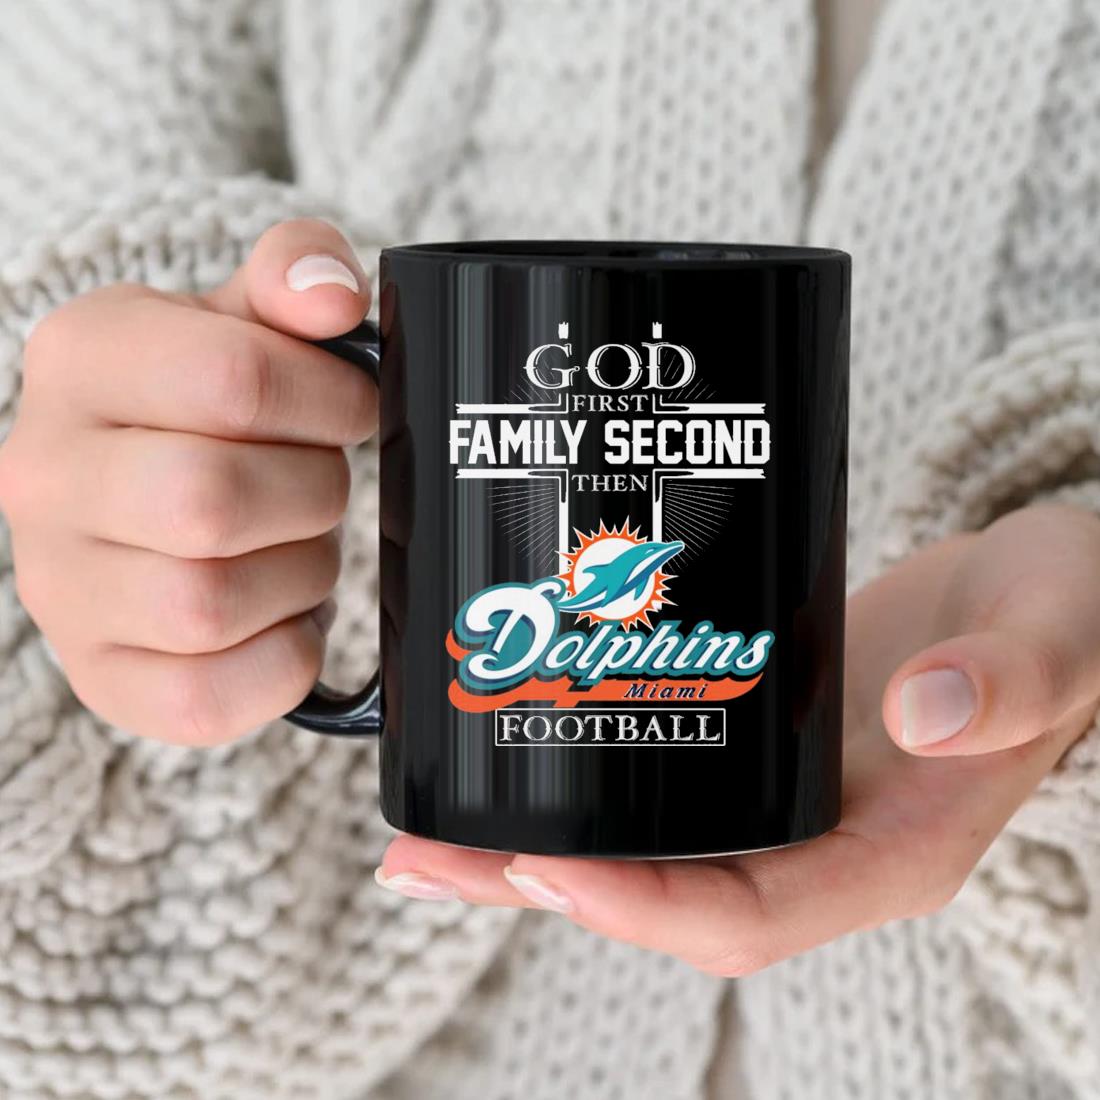 God First Family Second Then Miami Dolphins Football Mug